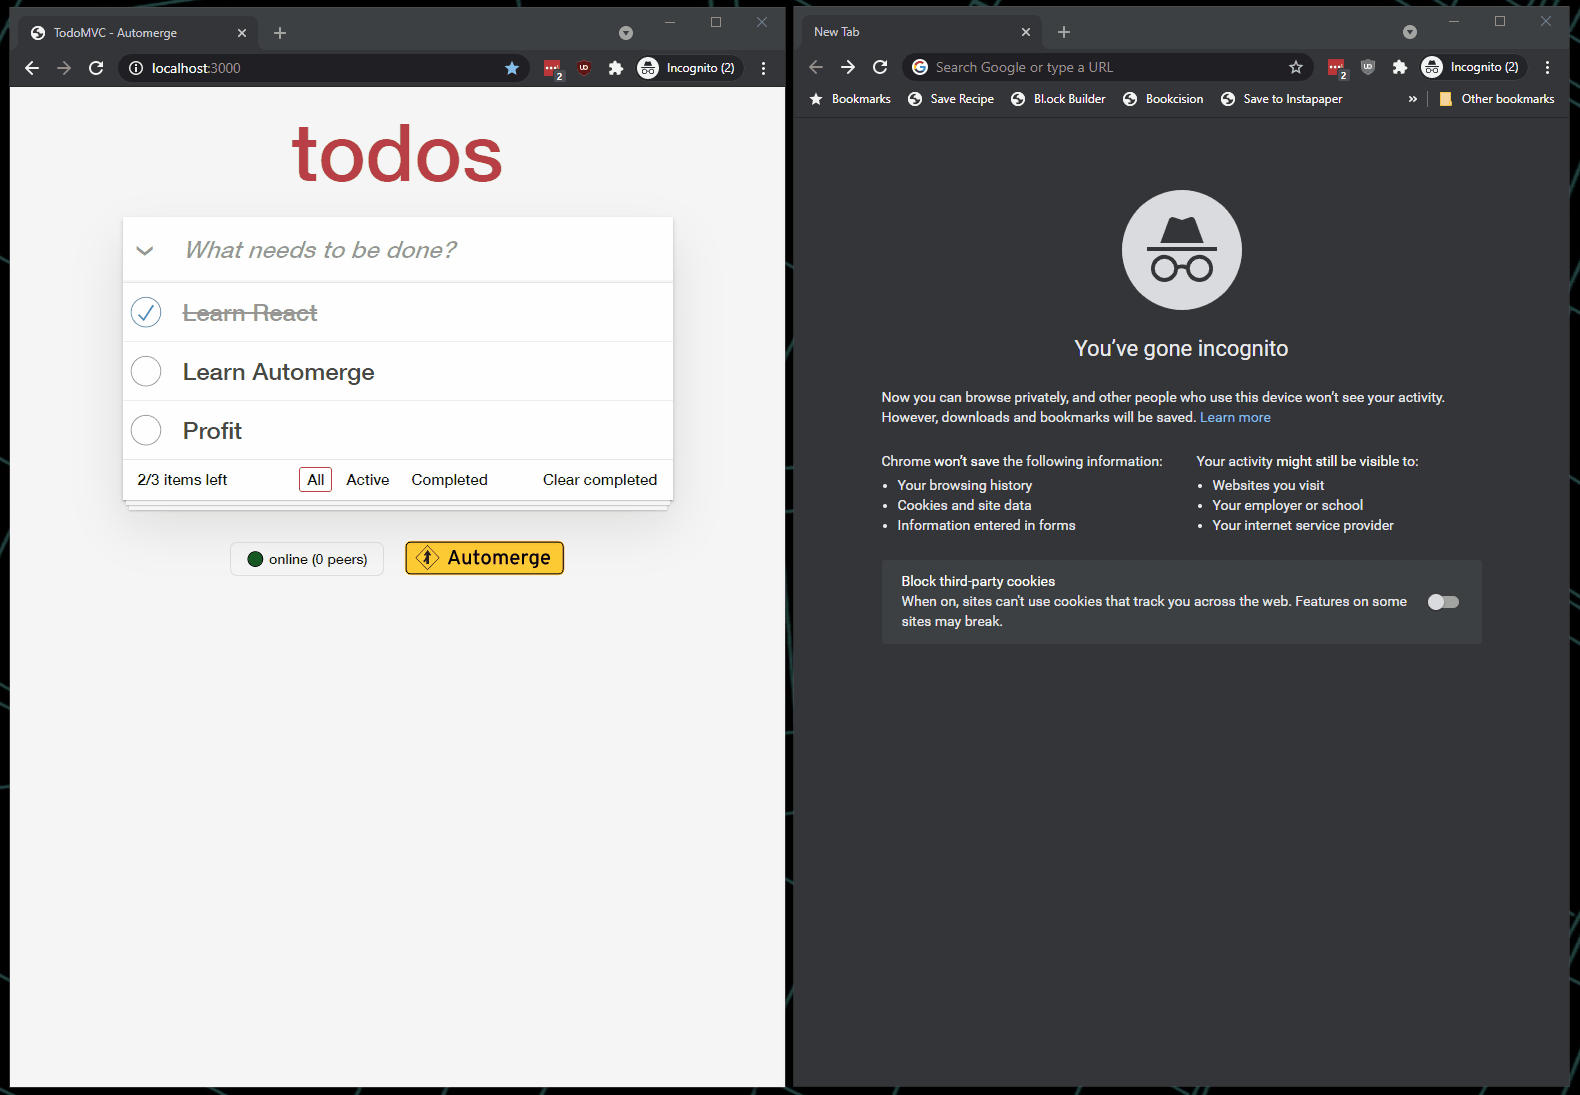 Screencast showing two browsers side-by-side with a todo list on each side. As changes are made in one browser, they are reflected in the other.